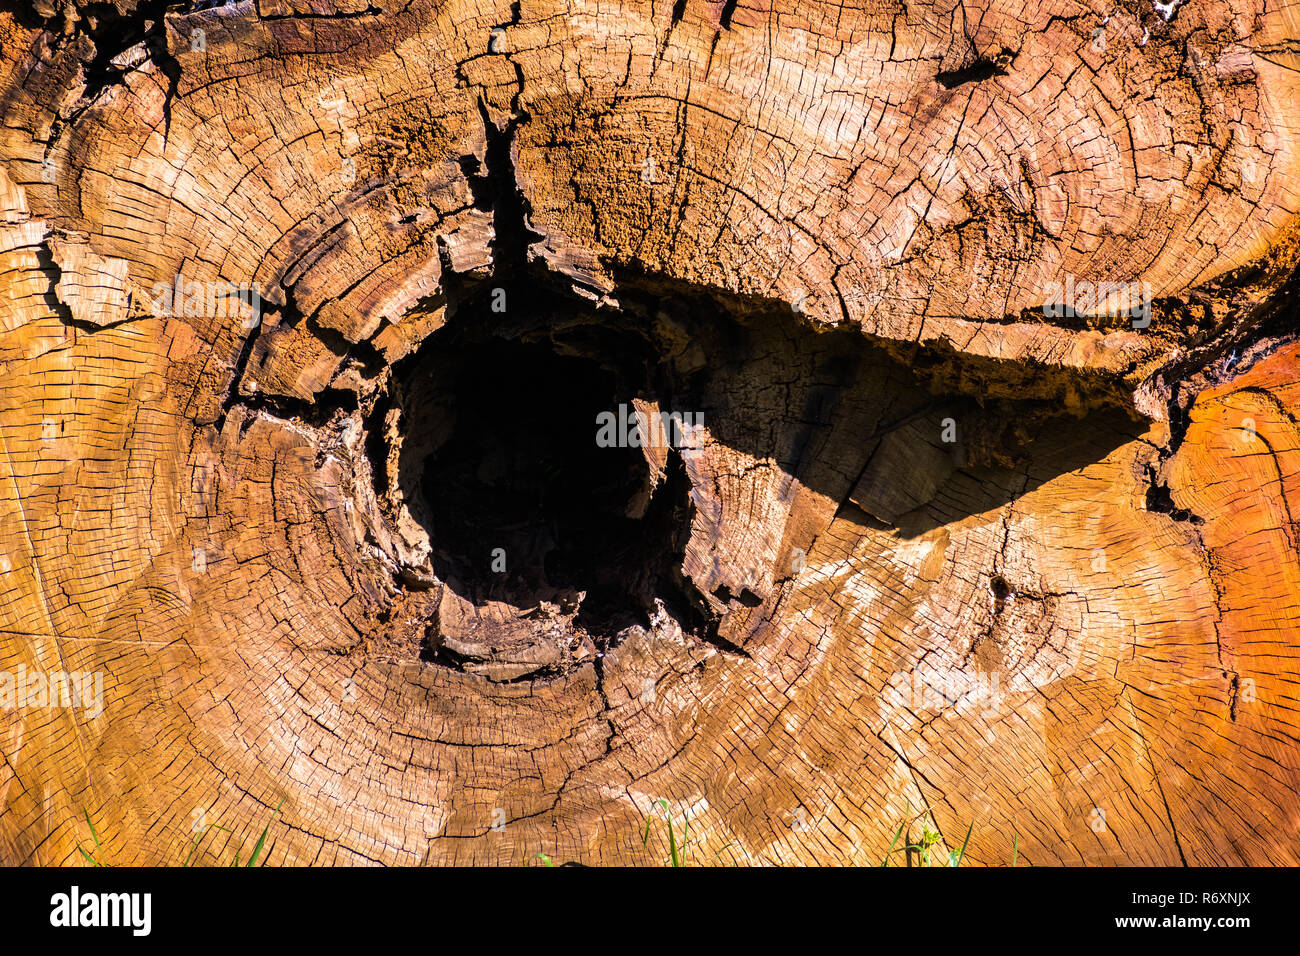 Cross section through an eucalyptus tree, California; Eucalyptus trees are native from Australia and invasive in other parts of the world, such as the Stock Photo